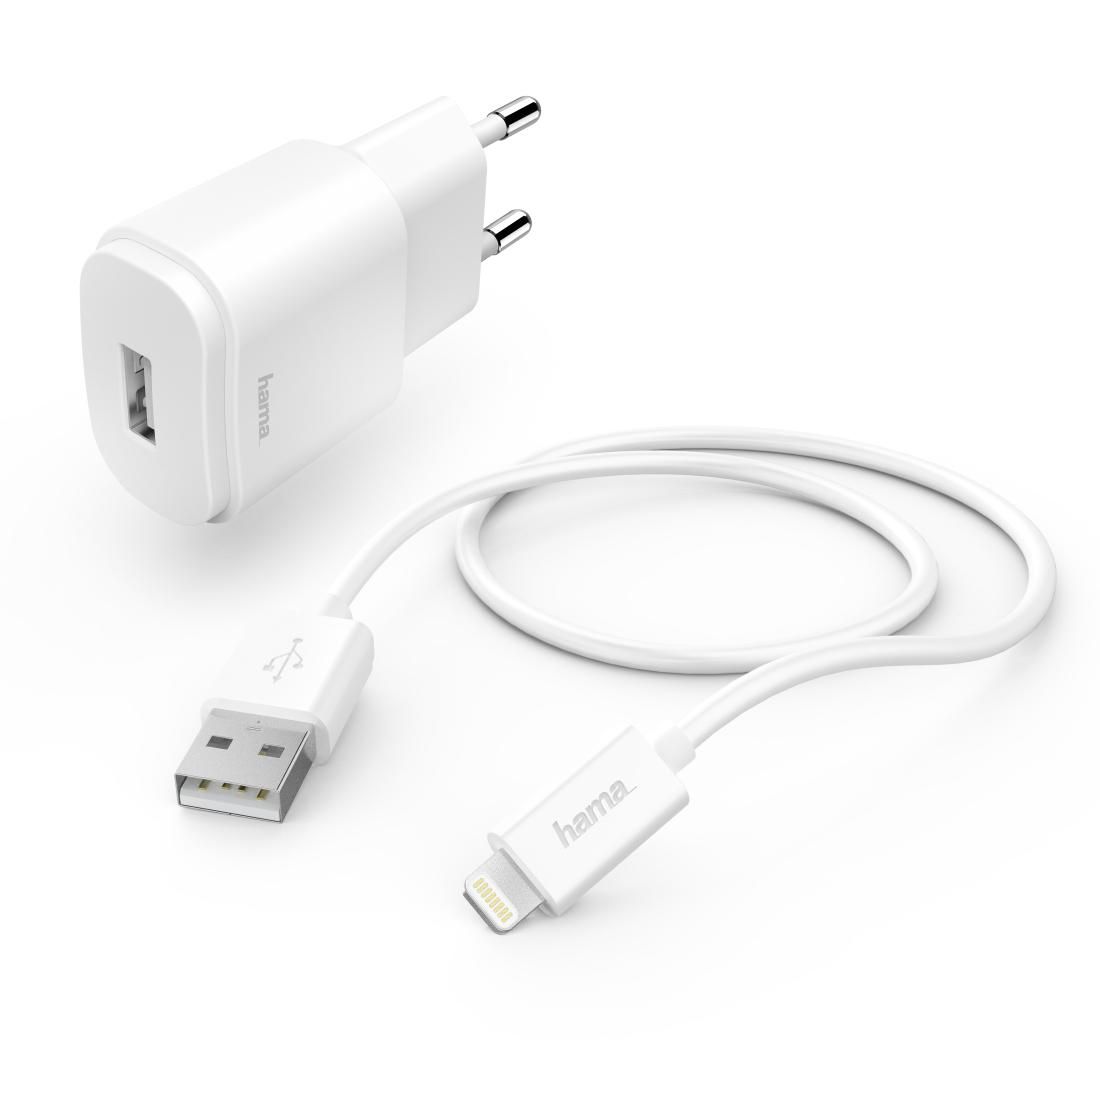 Hama 133756 W128328271 6 Mobile Device Charger White 